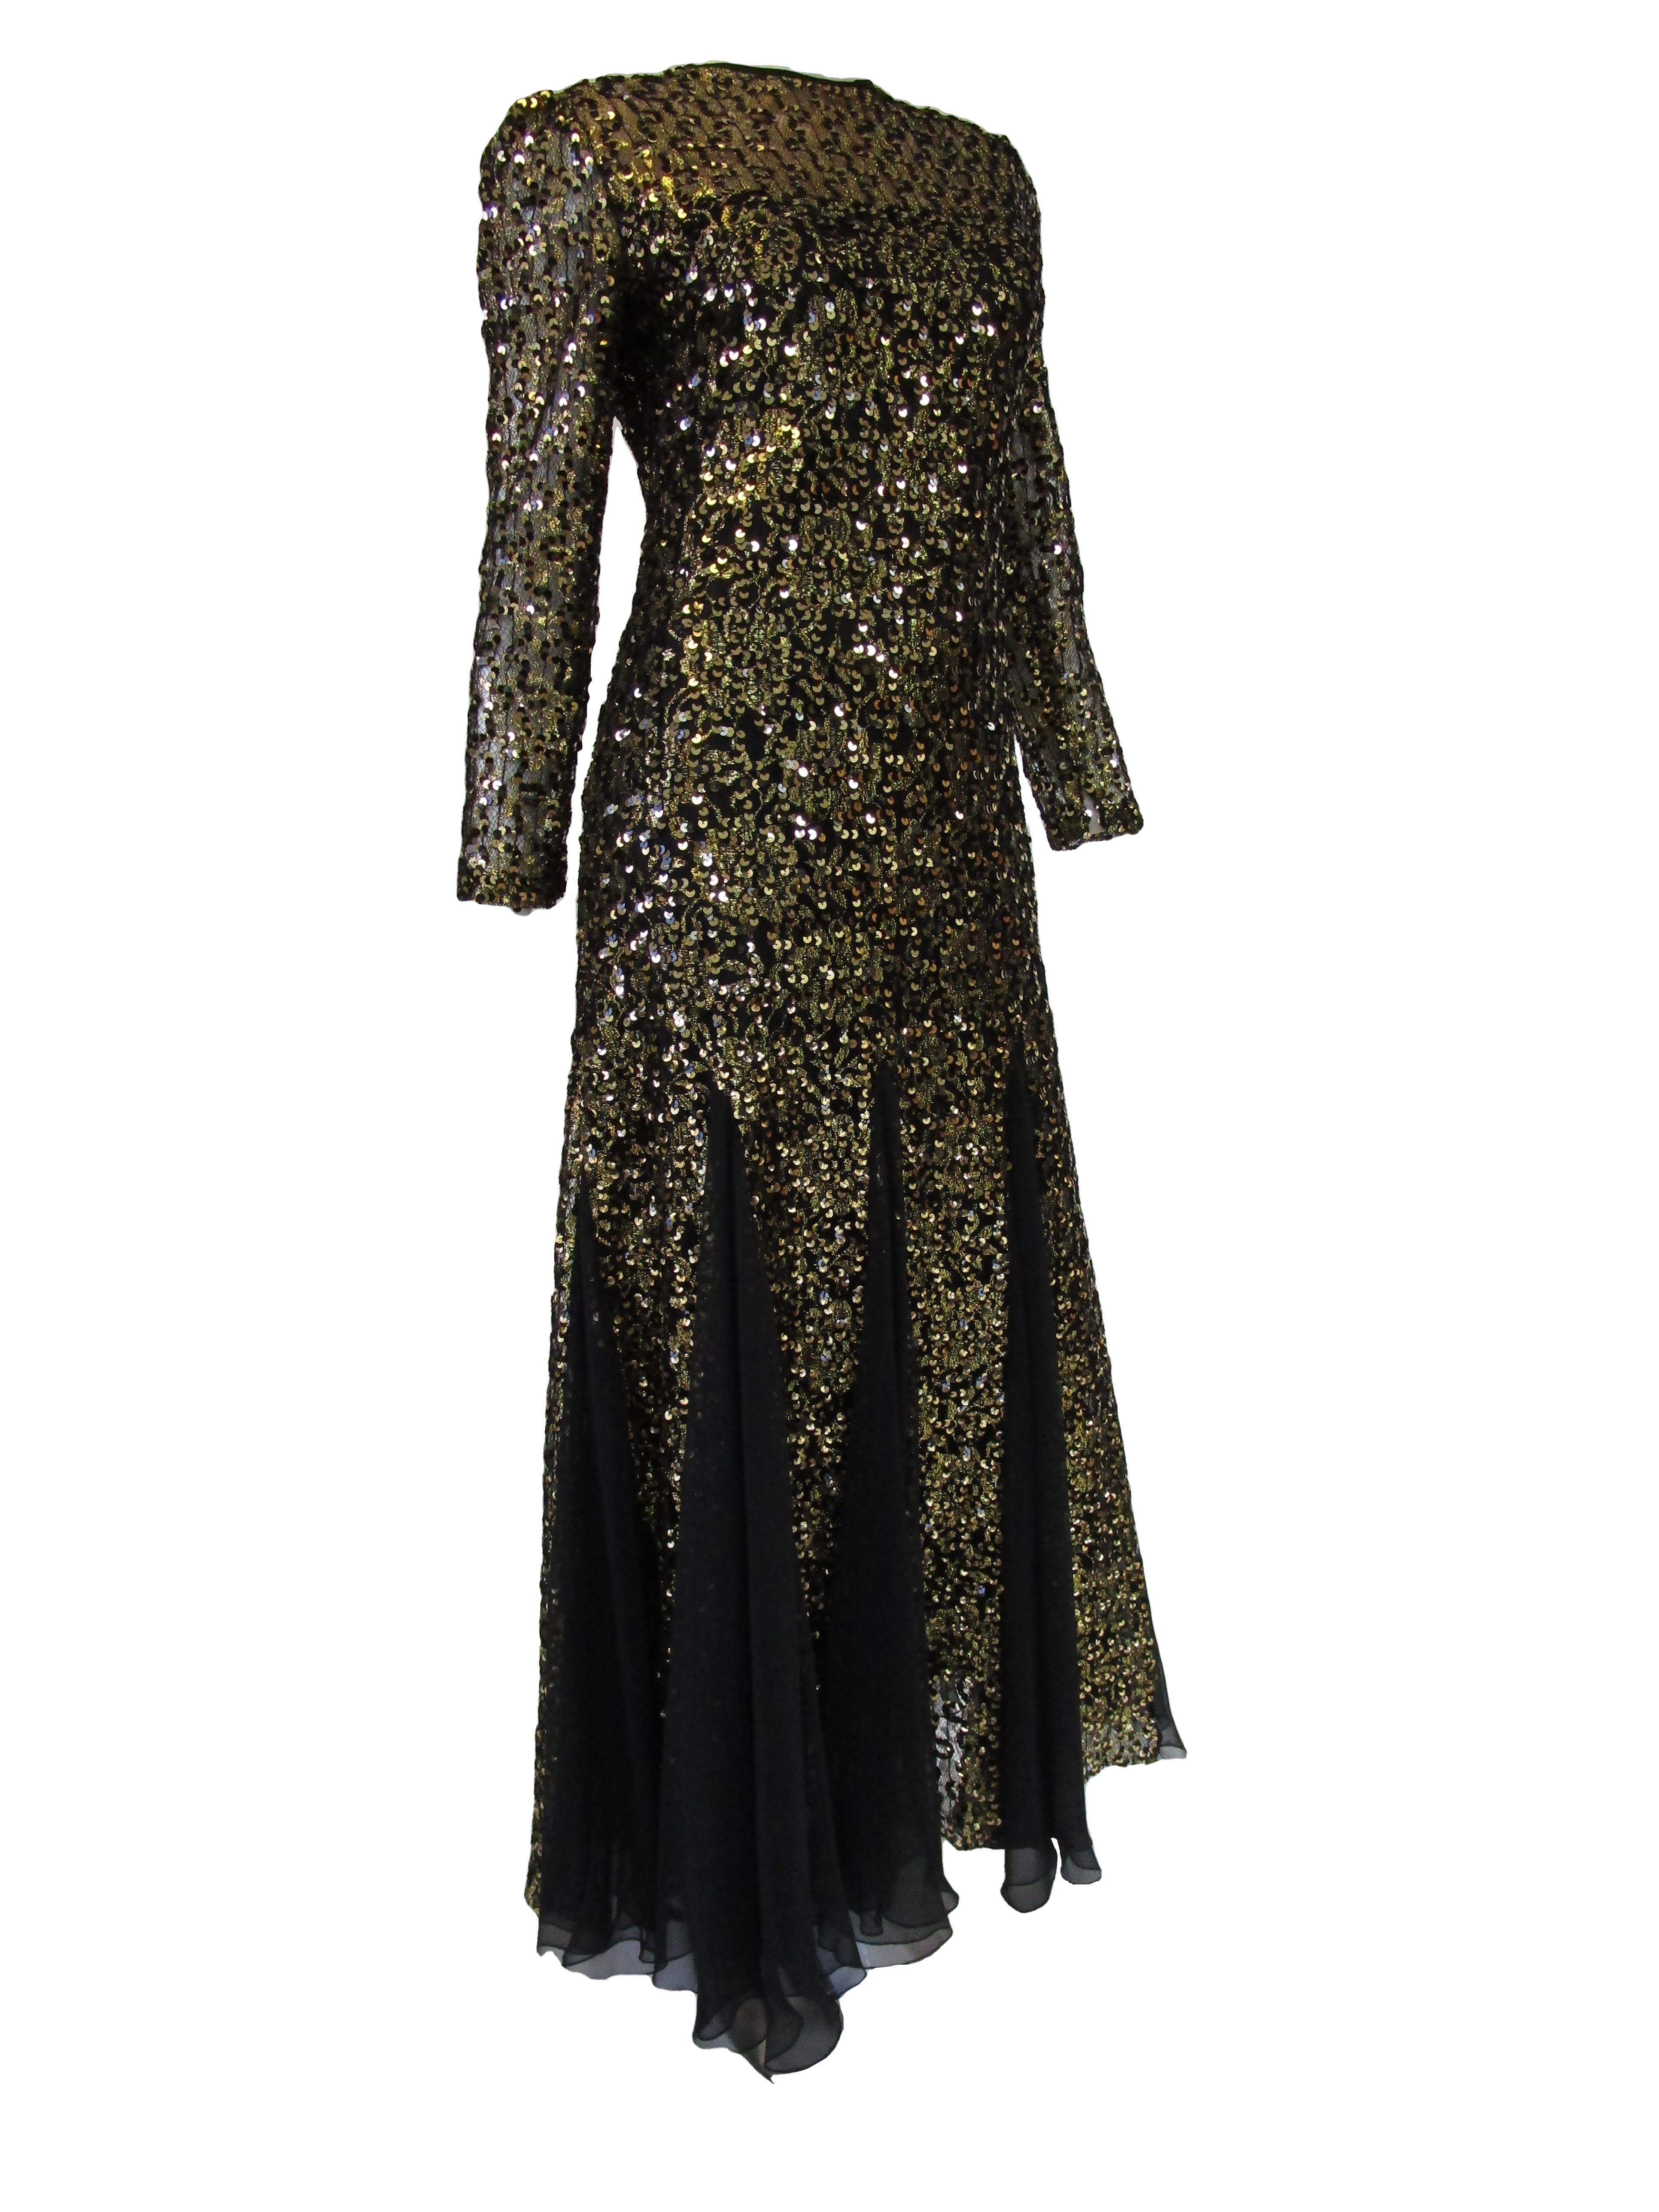 Women's 1980s Richilene Black and Gold Sequined Evening Dress  For Sale